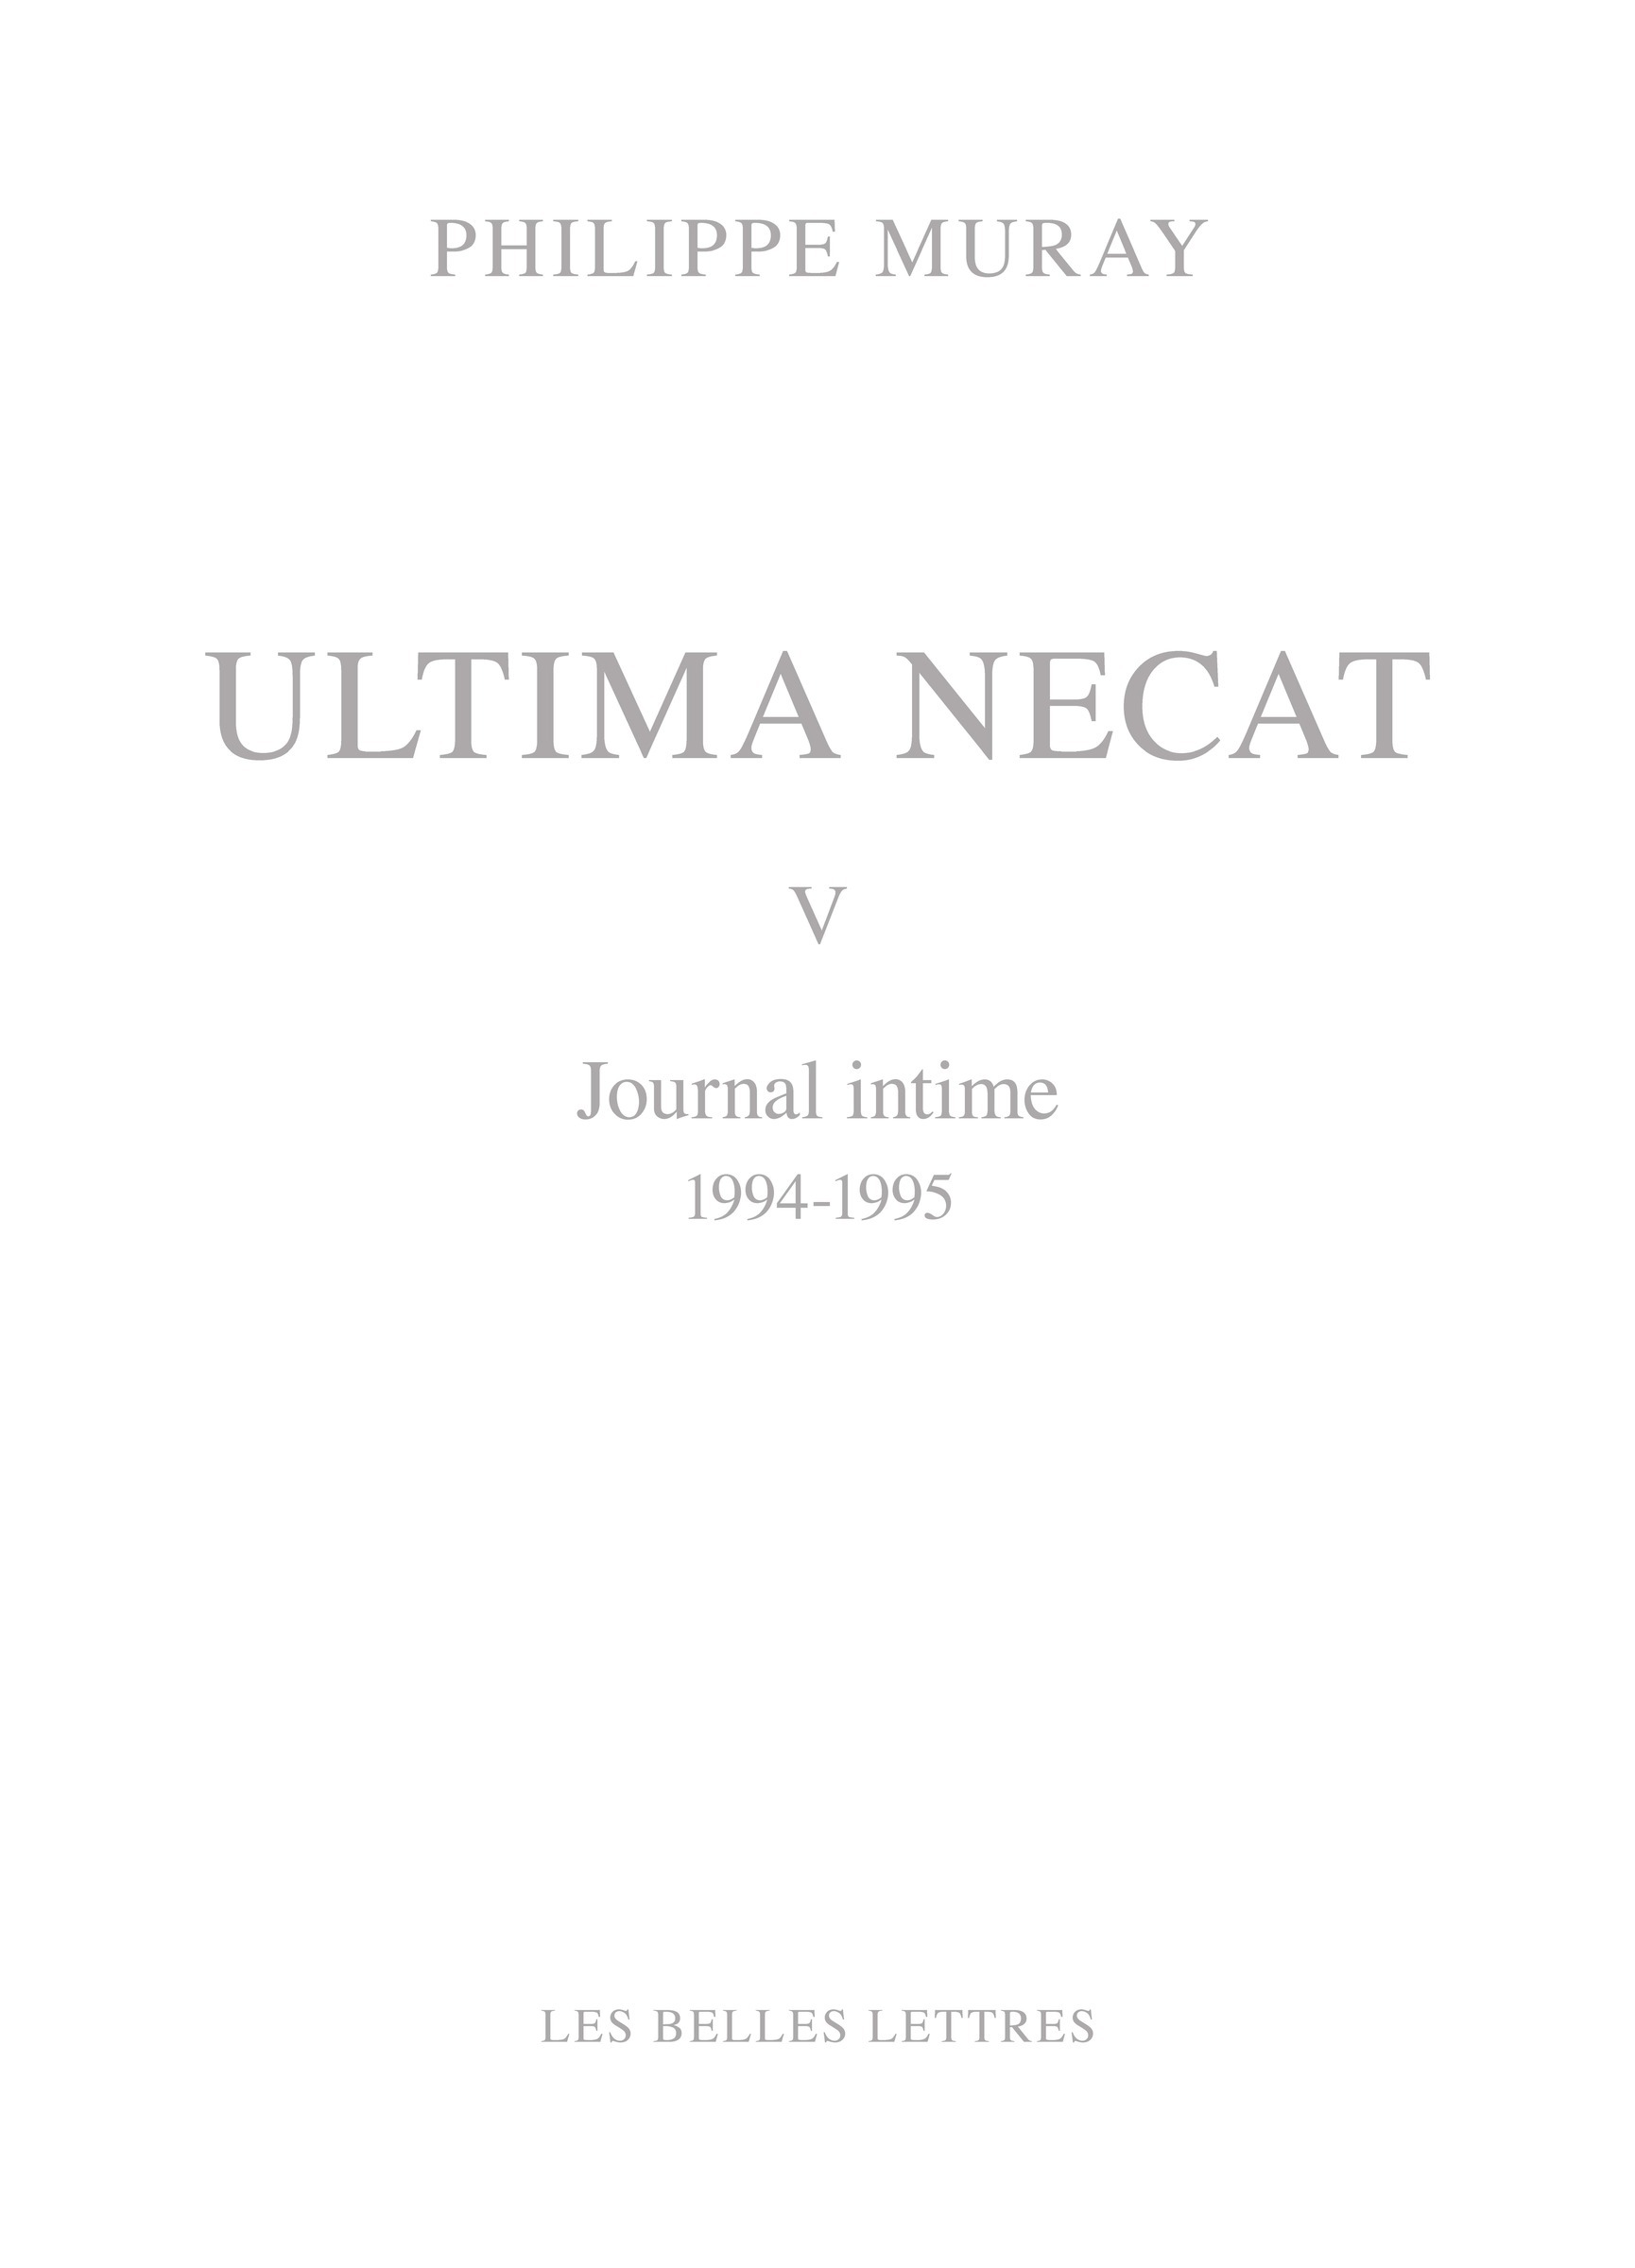 Ultima Necat V, Journal intime 1994-1995 (9782251455242-front-cover)